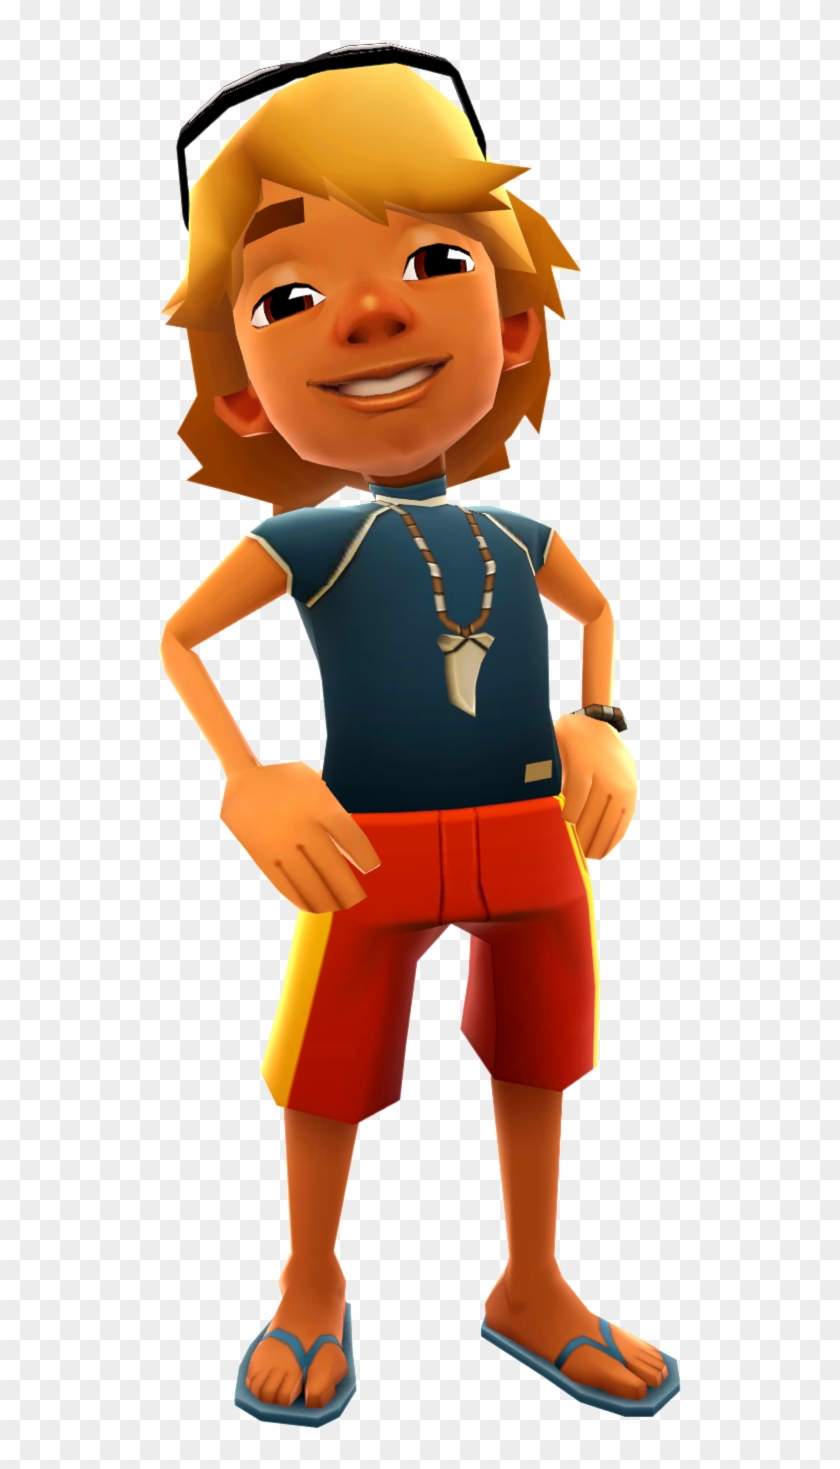 Brody - Brody From Subway Surfers Clipart #650573